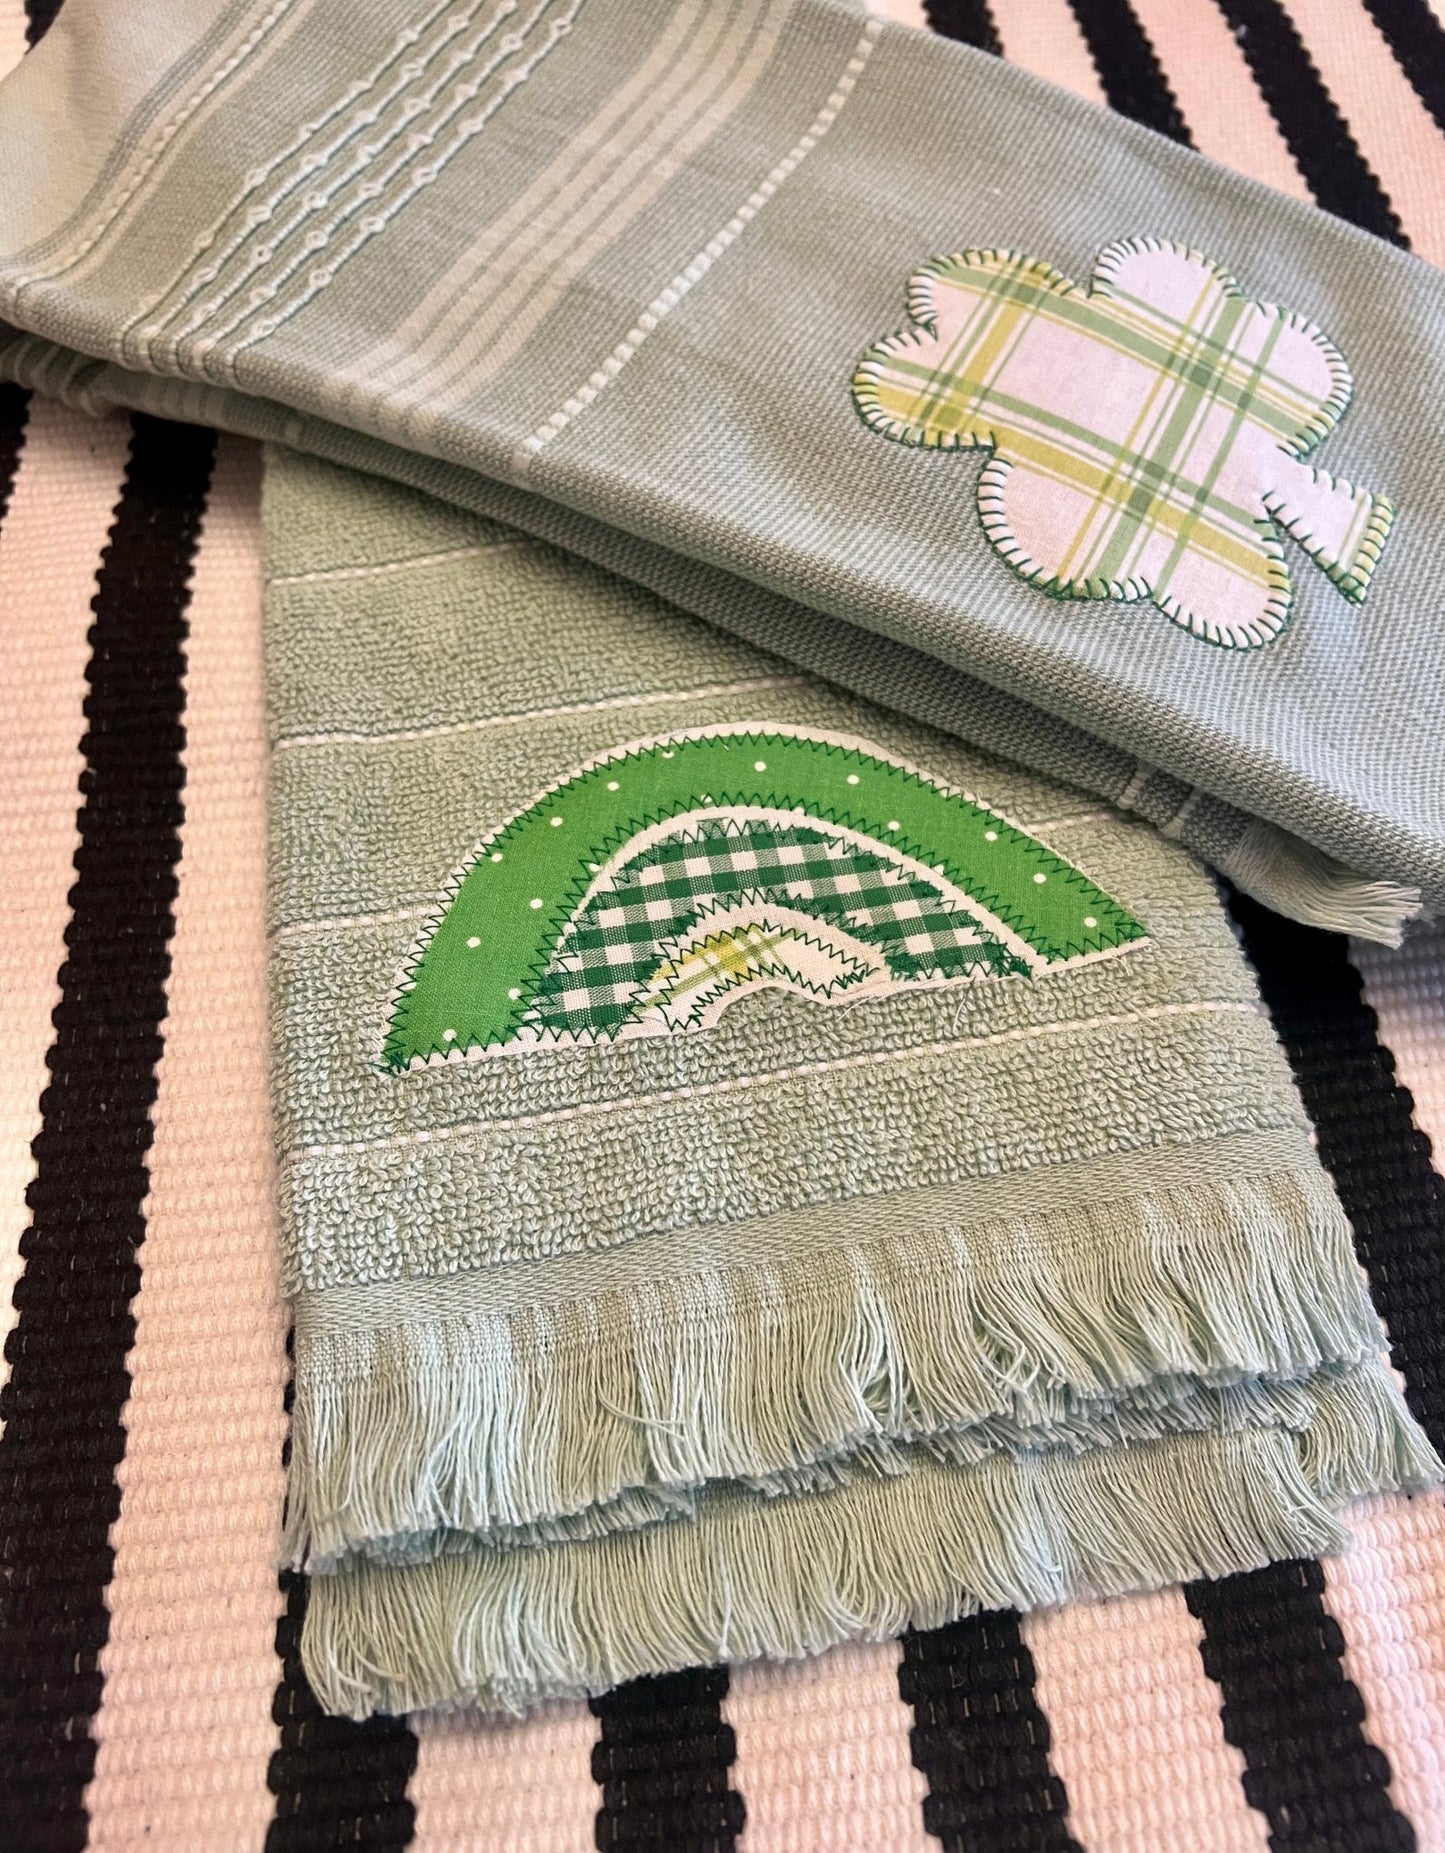 Saint Patrick's Clover Towel - Self Checkout at Creative Collab Collection - Miss Molly Designs, LLC